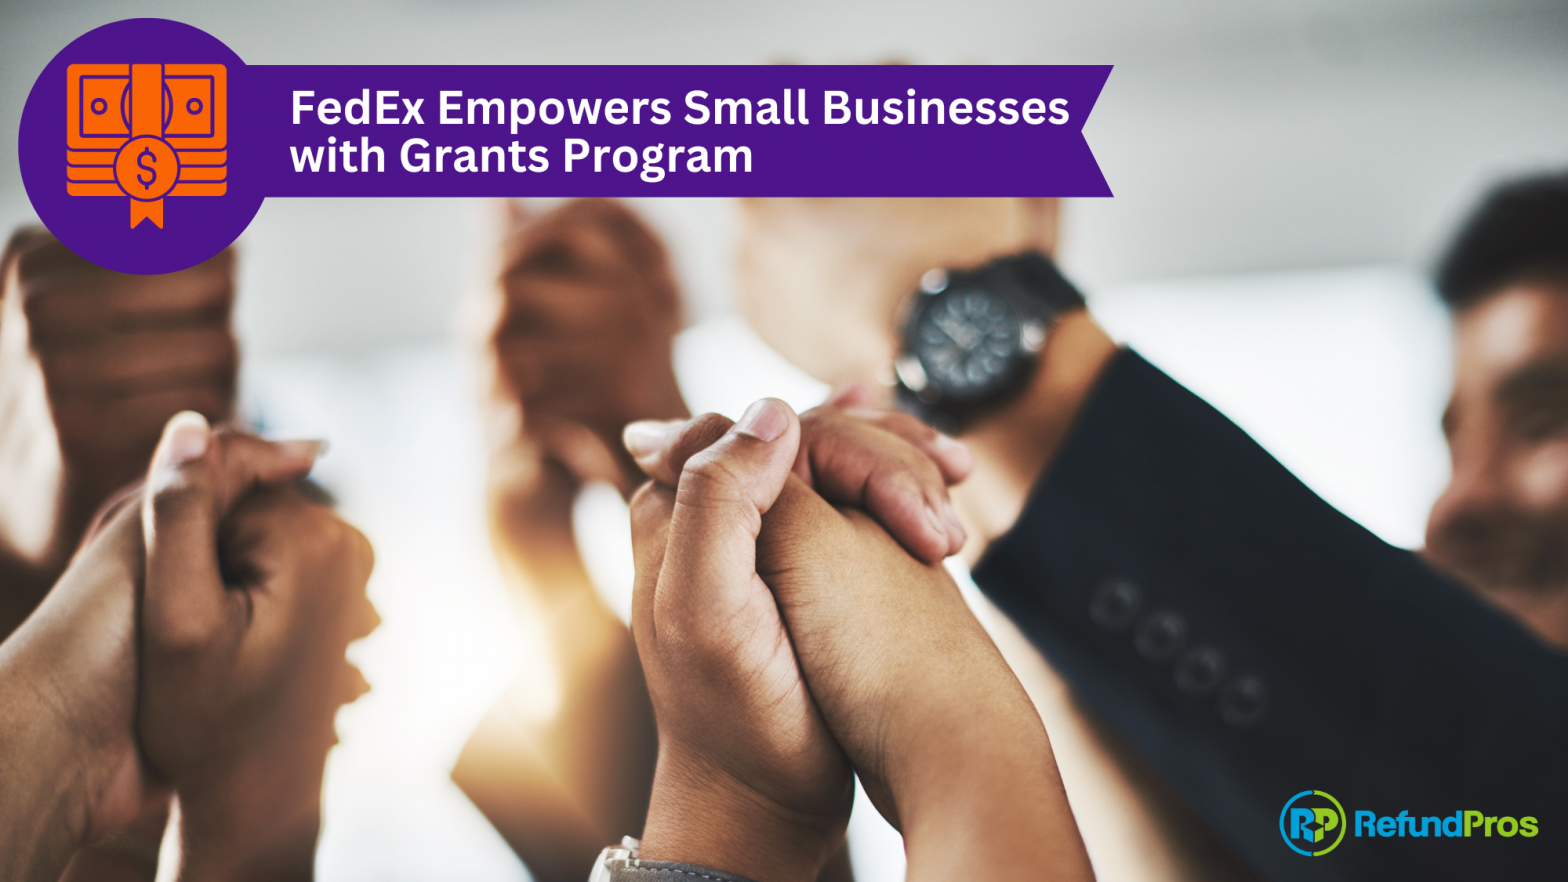 FedEx Empowers Small Businesses with Grants Program